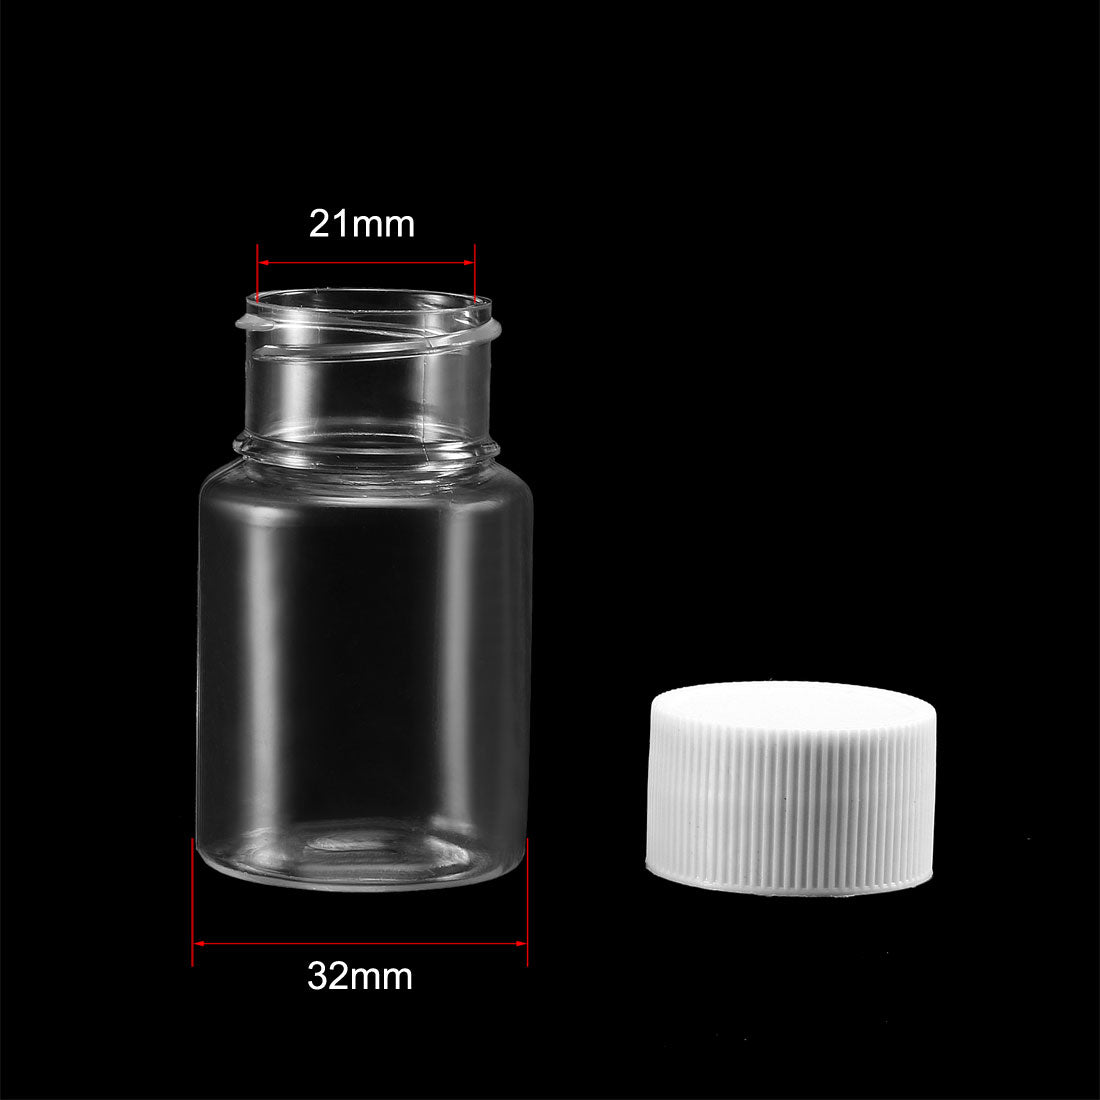 uxcell Uxcell Plastic Lab Chemical Reagent Bottle 30ml/1oz Wide Mouth Sample Sealing Liquid Storage Container 50pcs